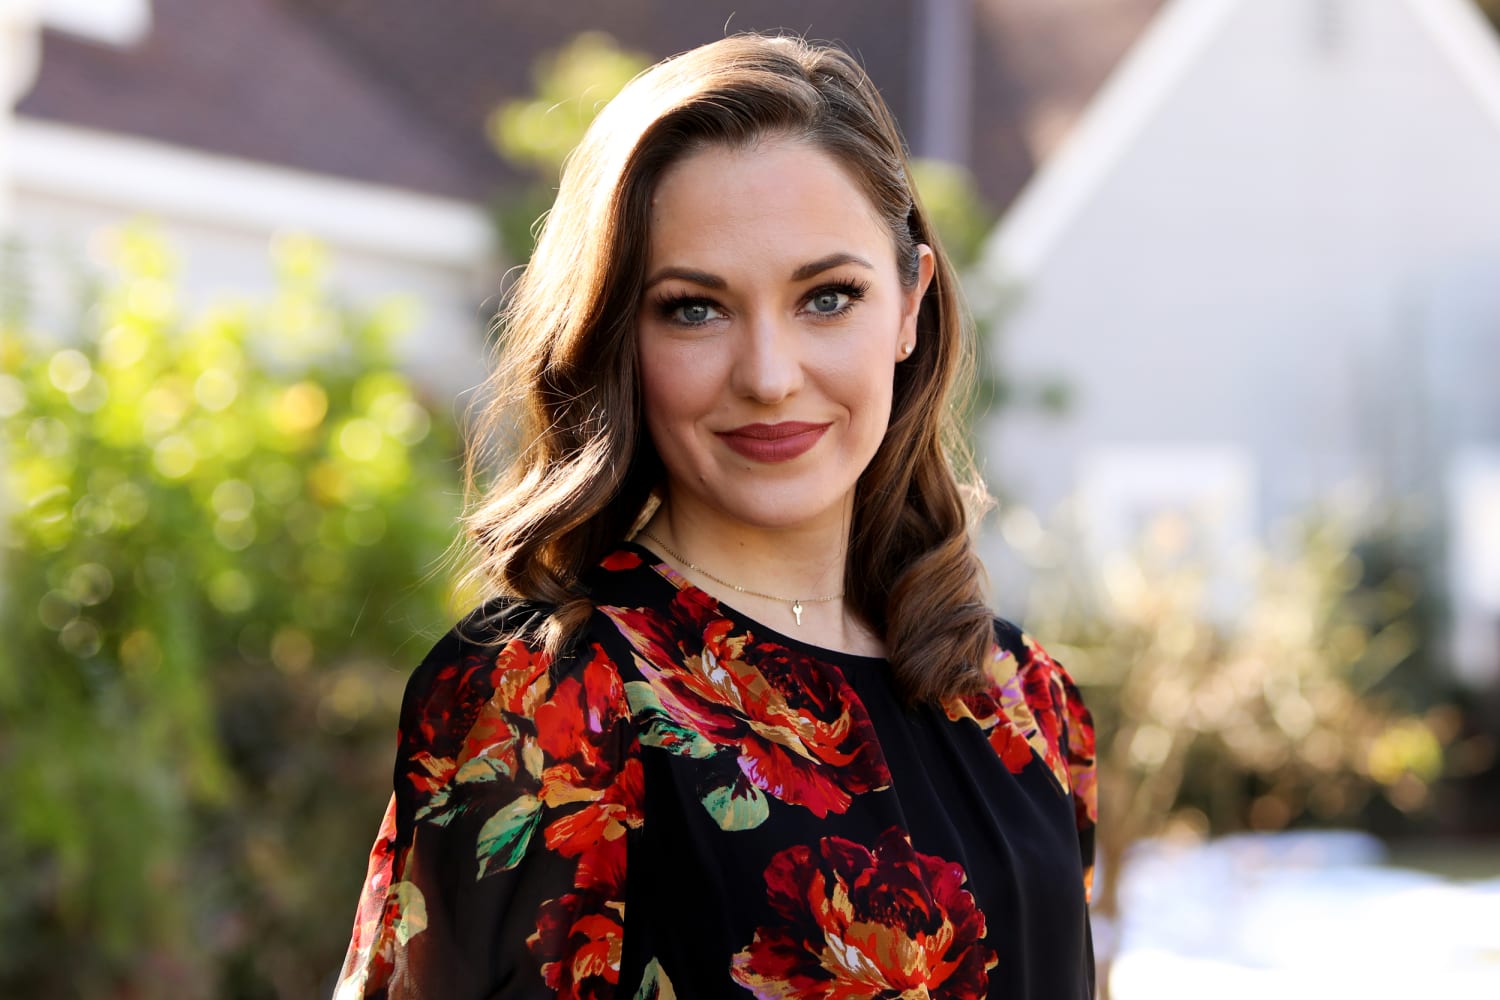 Broadway actor Laura Osnes says she quit show over vaccine requirement.